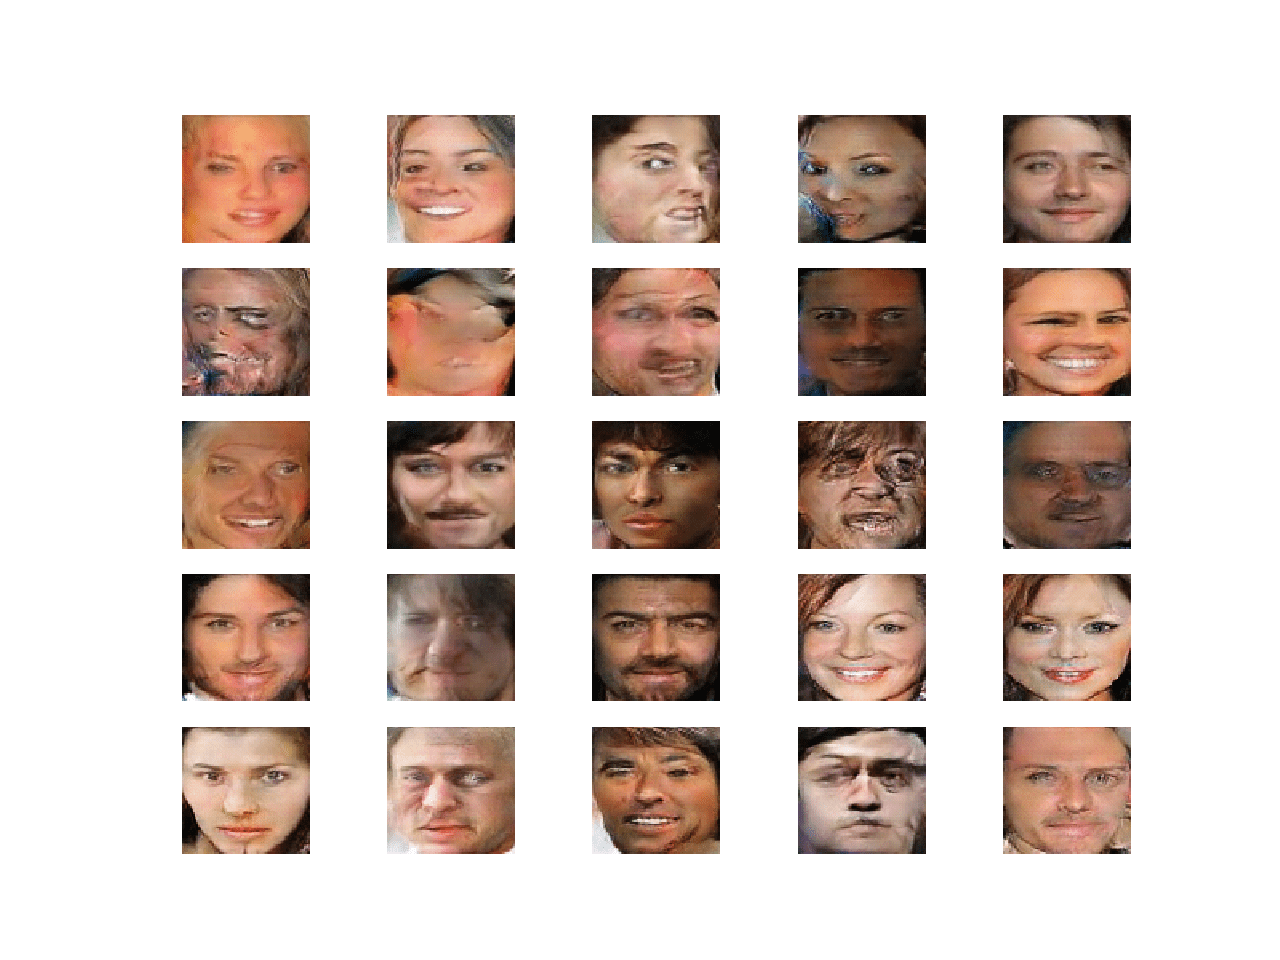 How to Explore the GAN Latent Space When Generating Faces